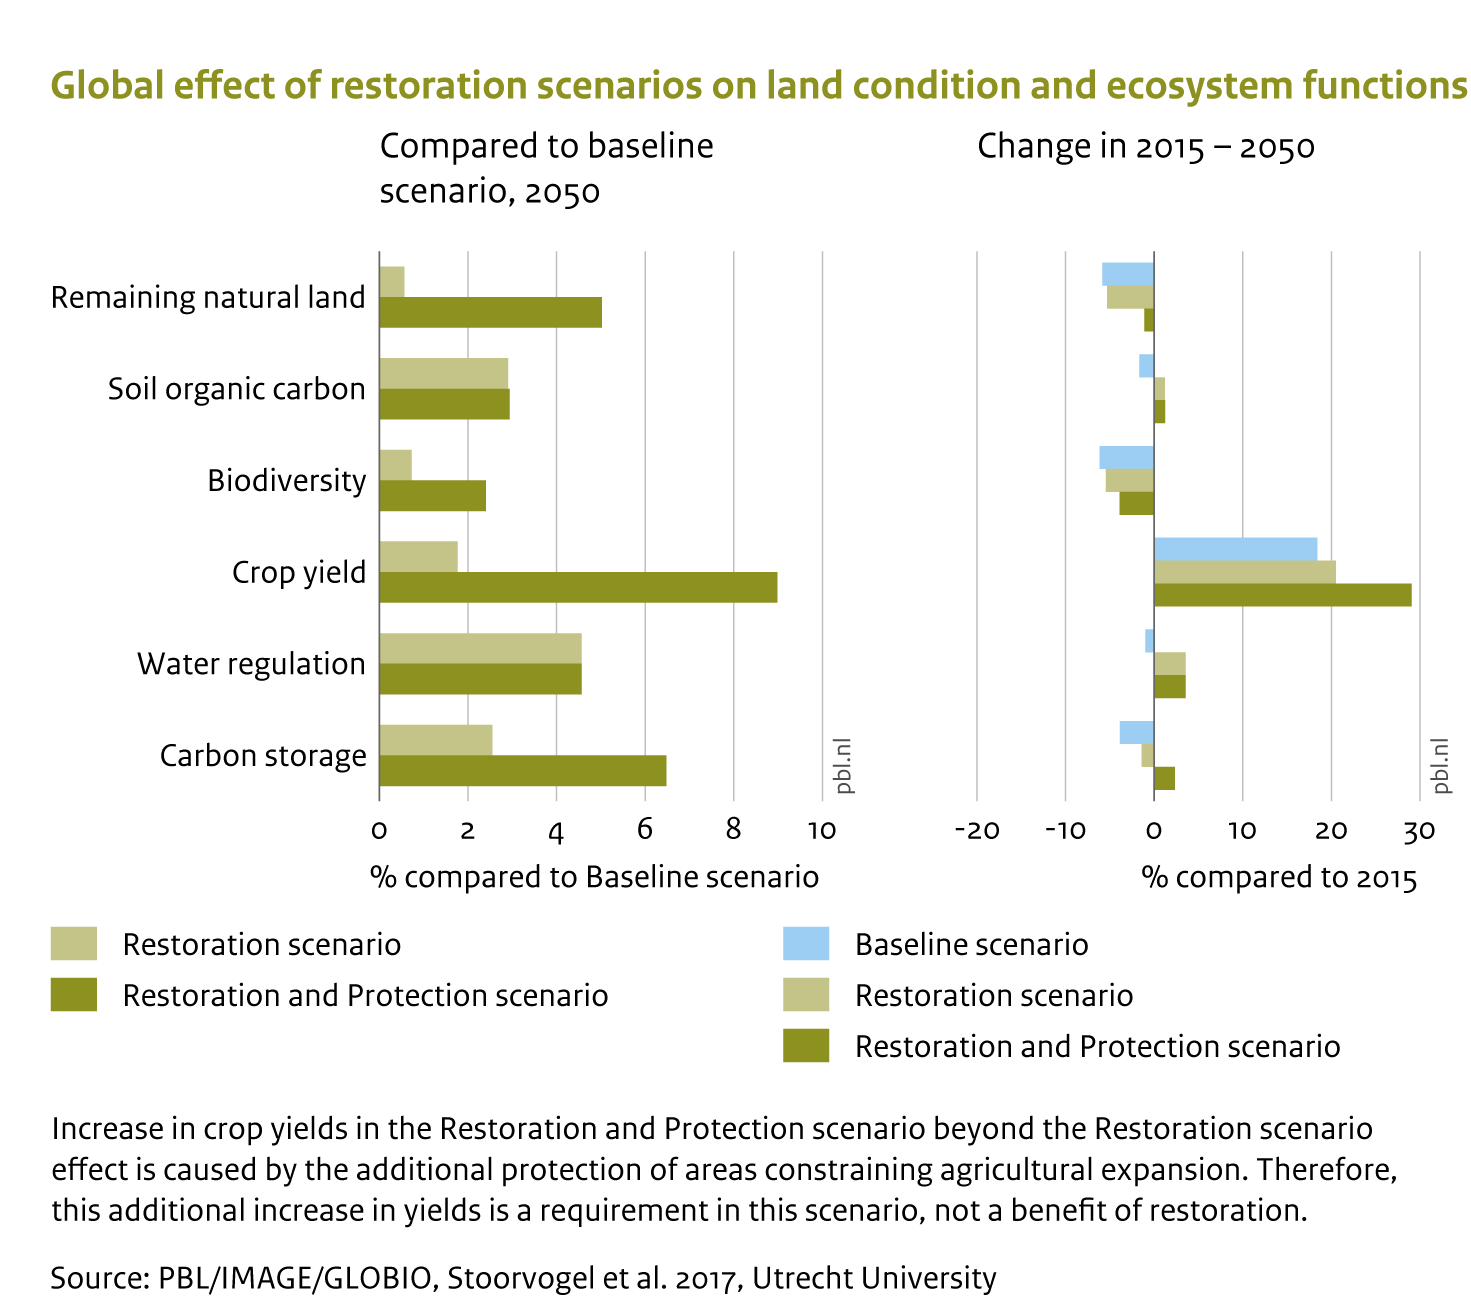 Global effect of restoration scenarios in land condition and ecosystem functions. Bar chart left showing improvements across 6 ecosystem functions in two restoration scenarios compared to the baseline scenario in 2050. Bar chart right showing improvements in ecosystem functions in all three scenarios compared to 2050.